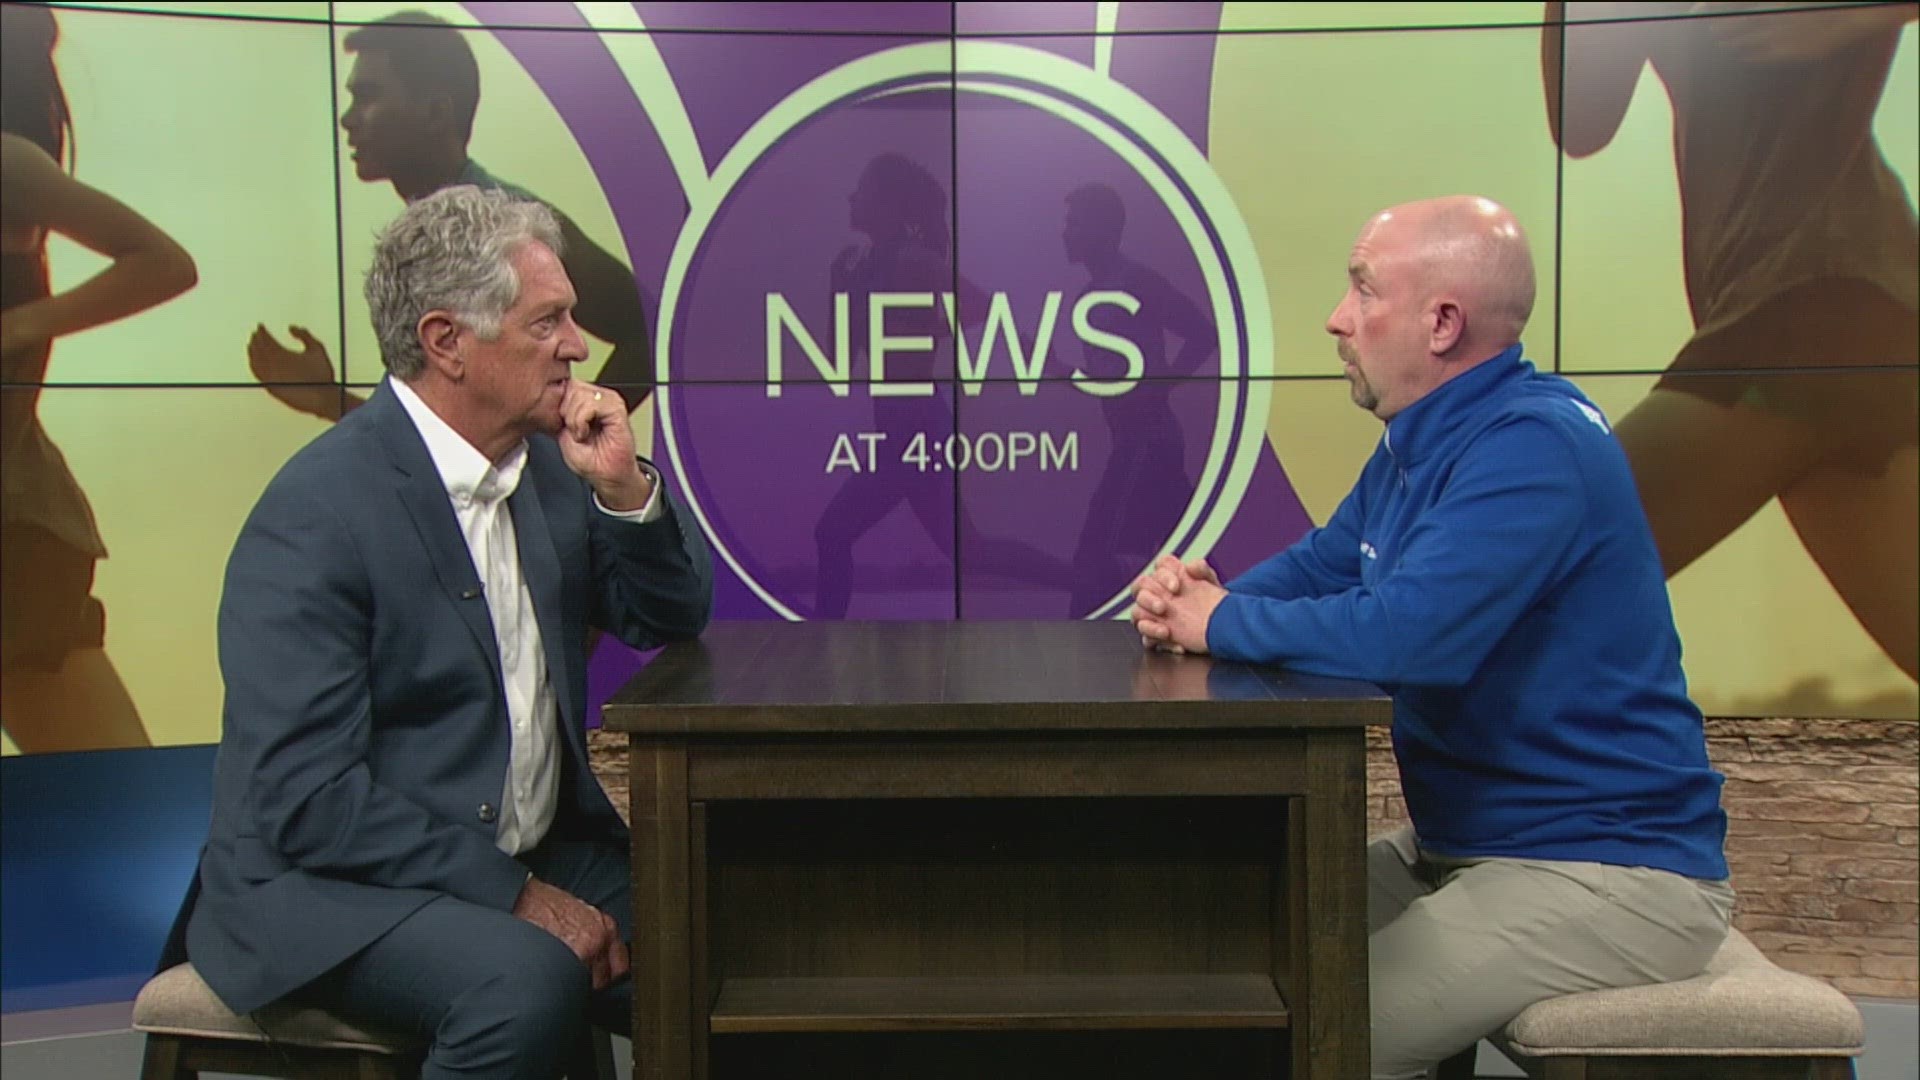 With the Glass City Marathon coming up next month, Jeff Swartz from Mercy Health talks with Dan Cummins about how best to prepare your body for marathons.